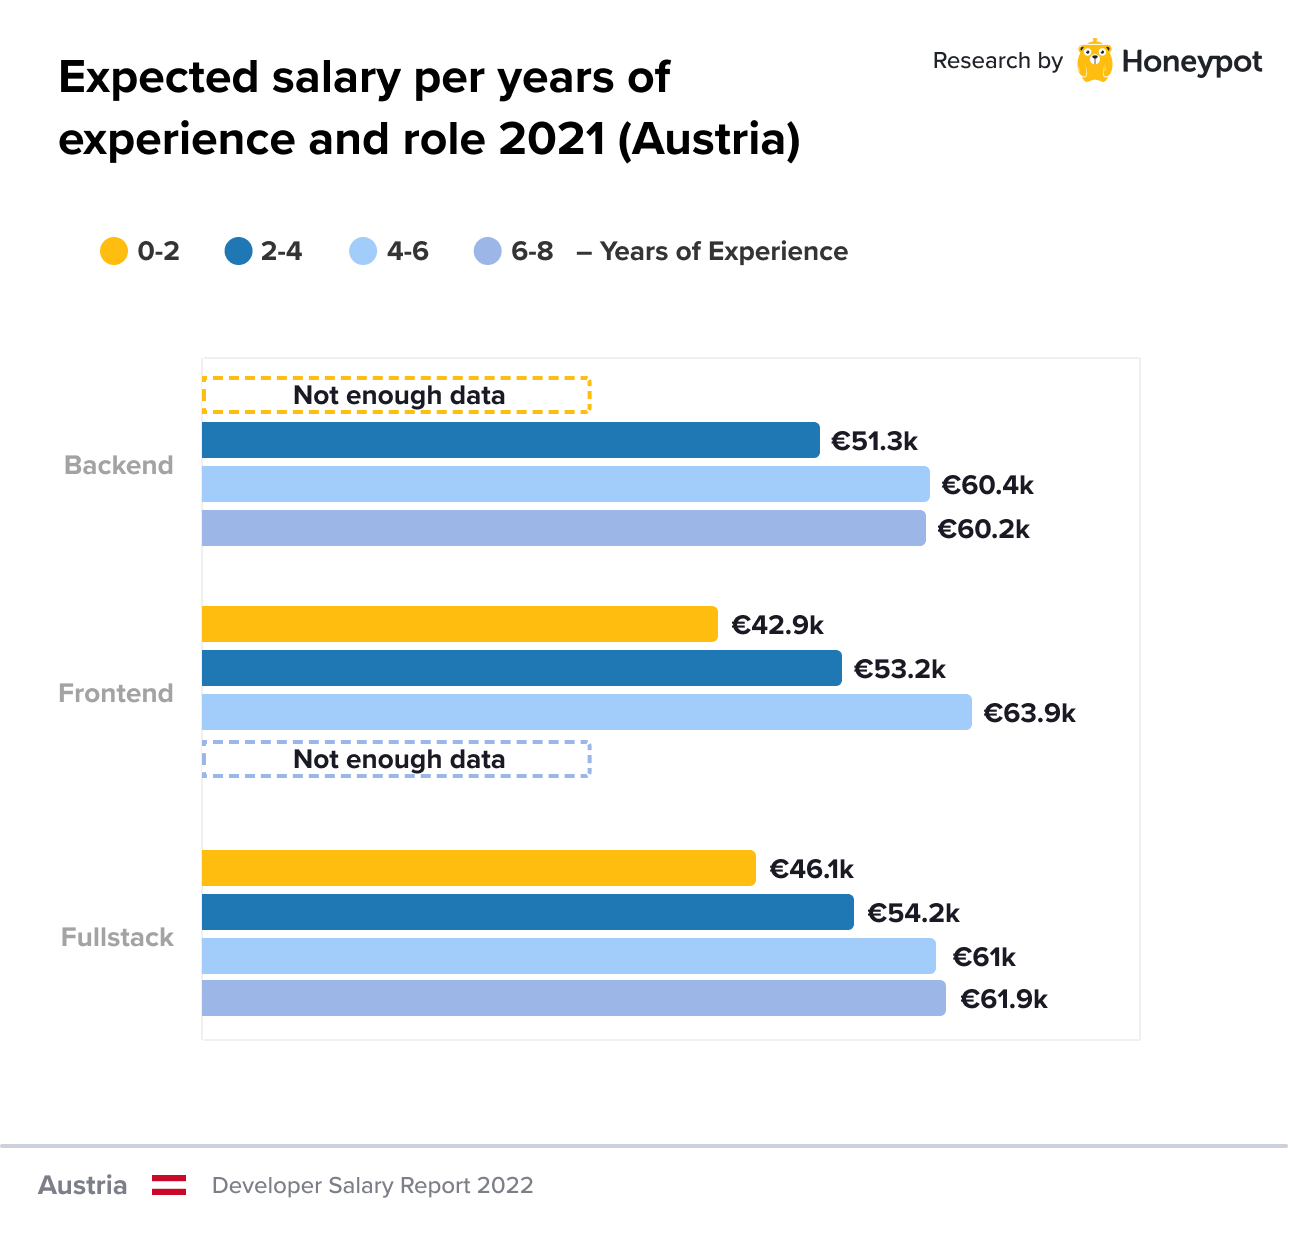 Expected salary per years of experience and role 2021